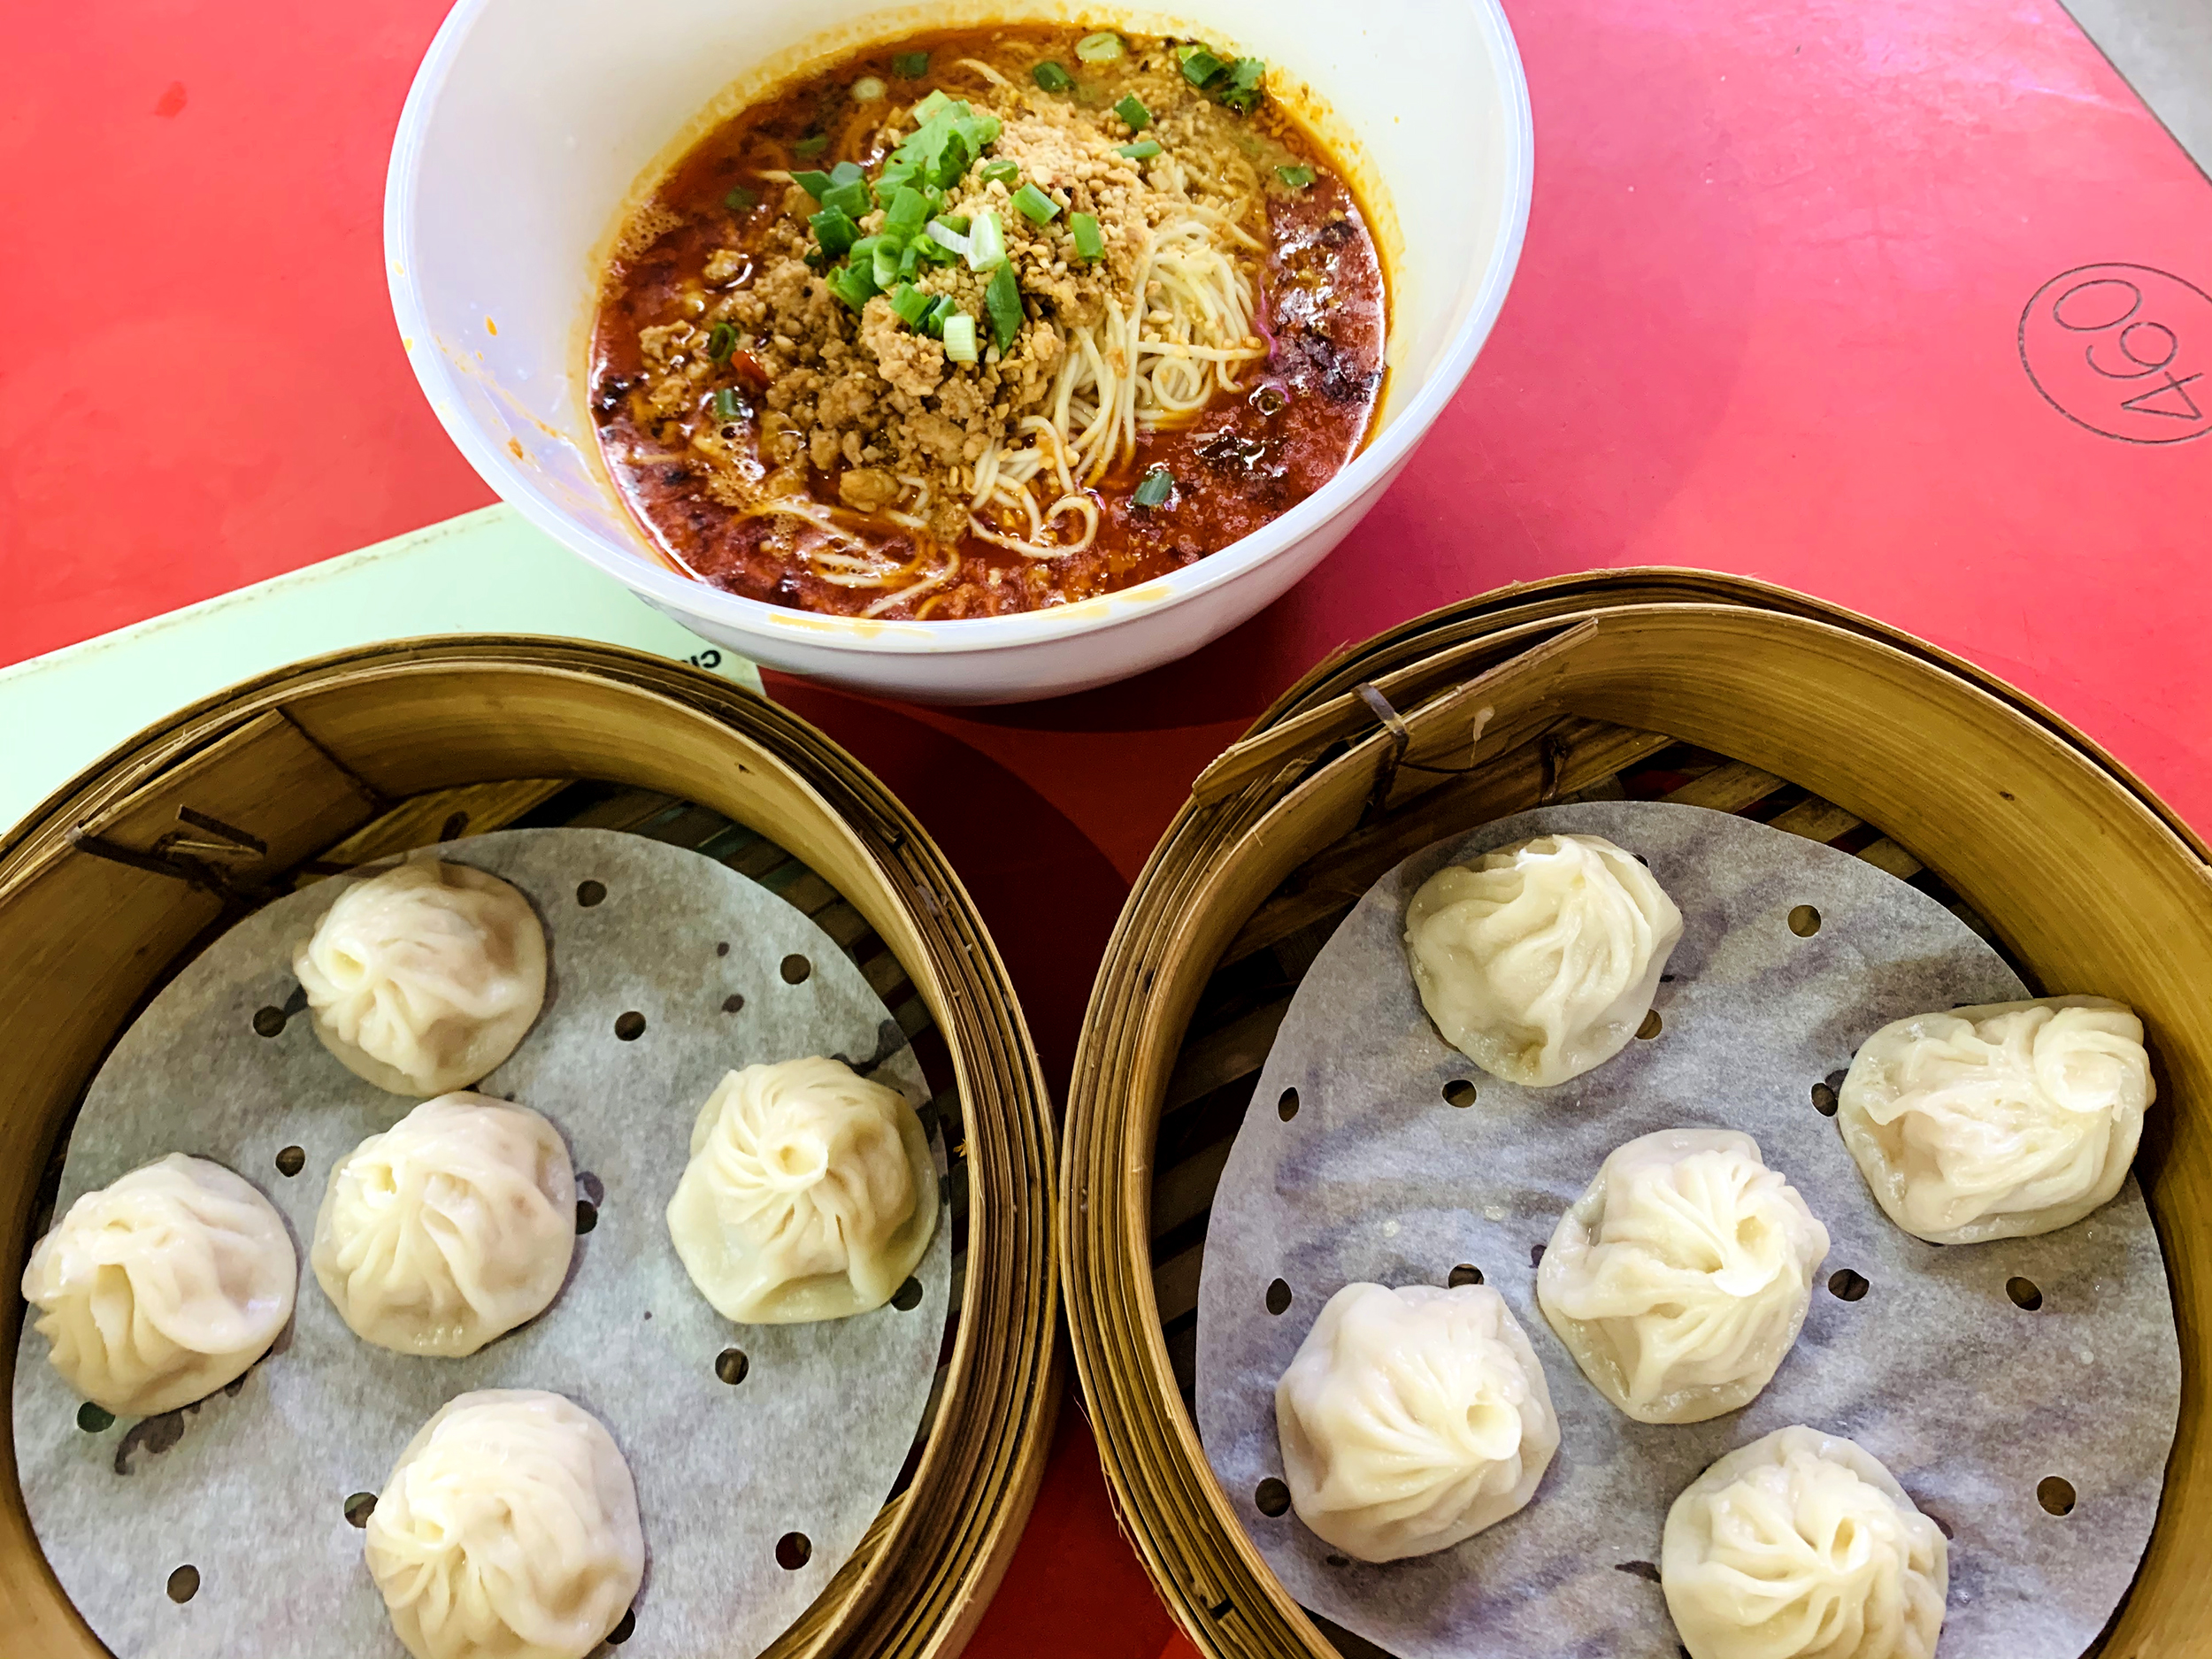 Enjoy authentic and affordable Michelin-recommended Xiao Long Bao